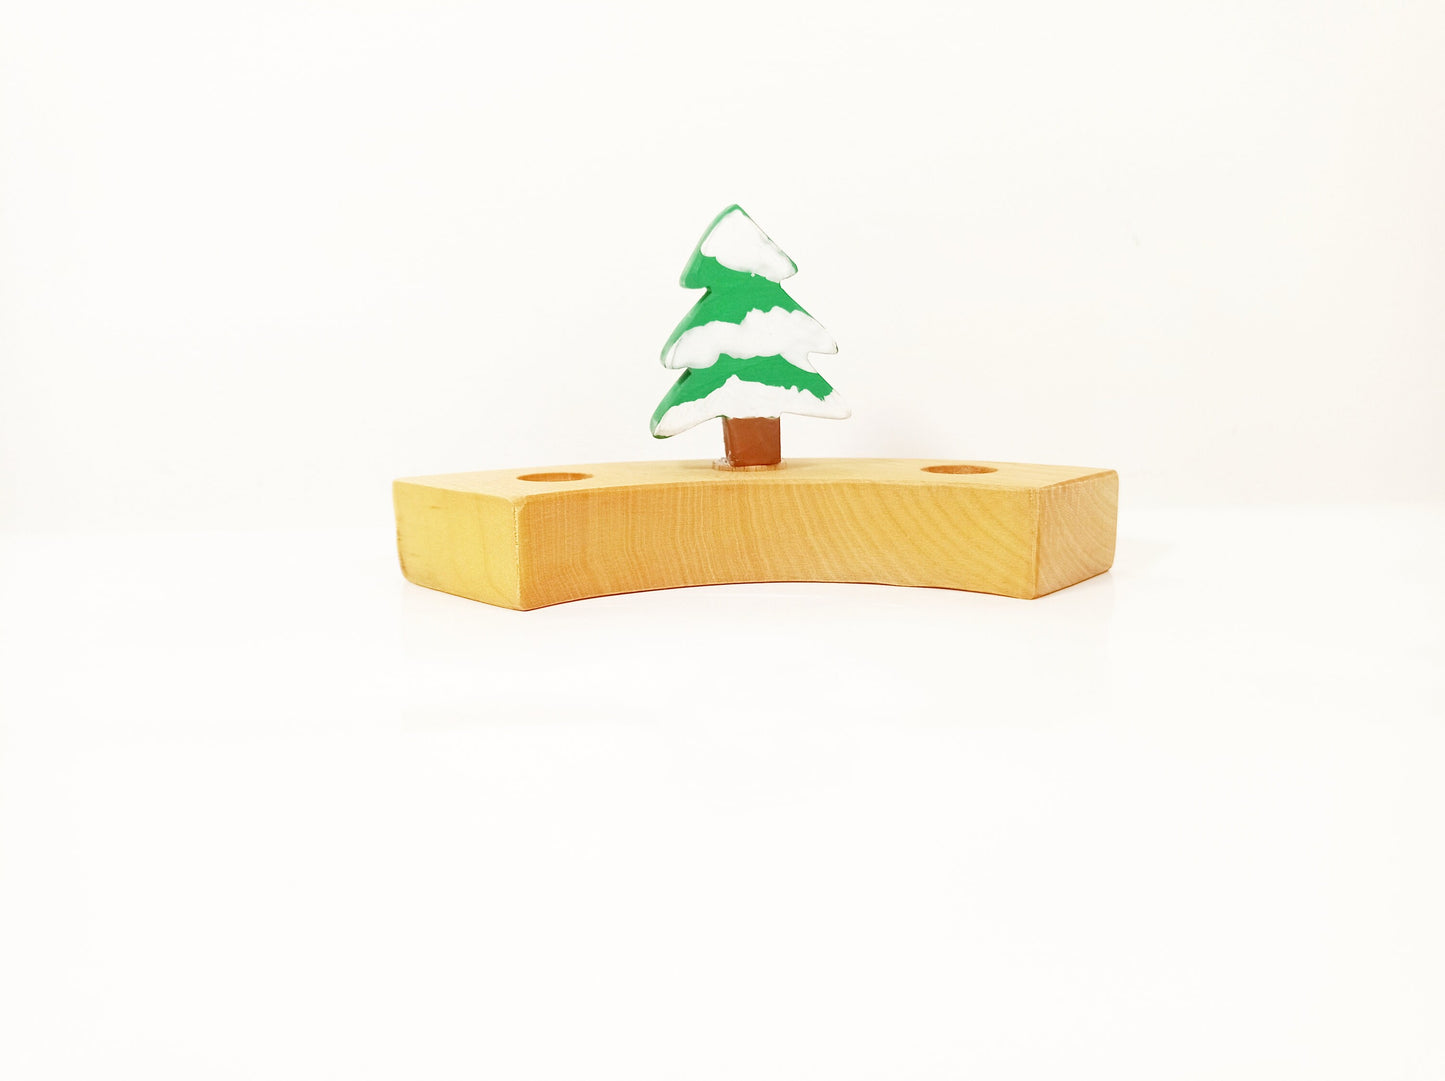 Evergreen tree with snow celebration ring ornament